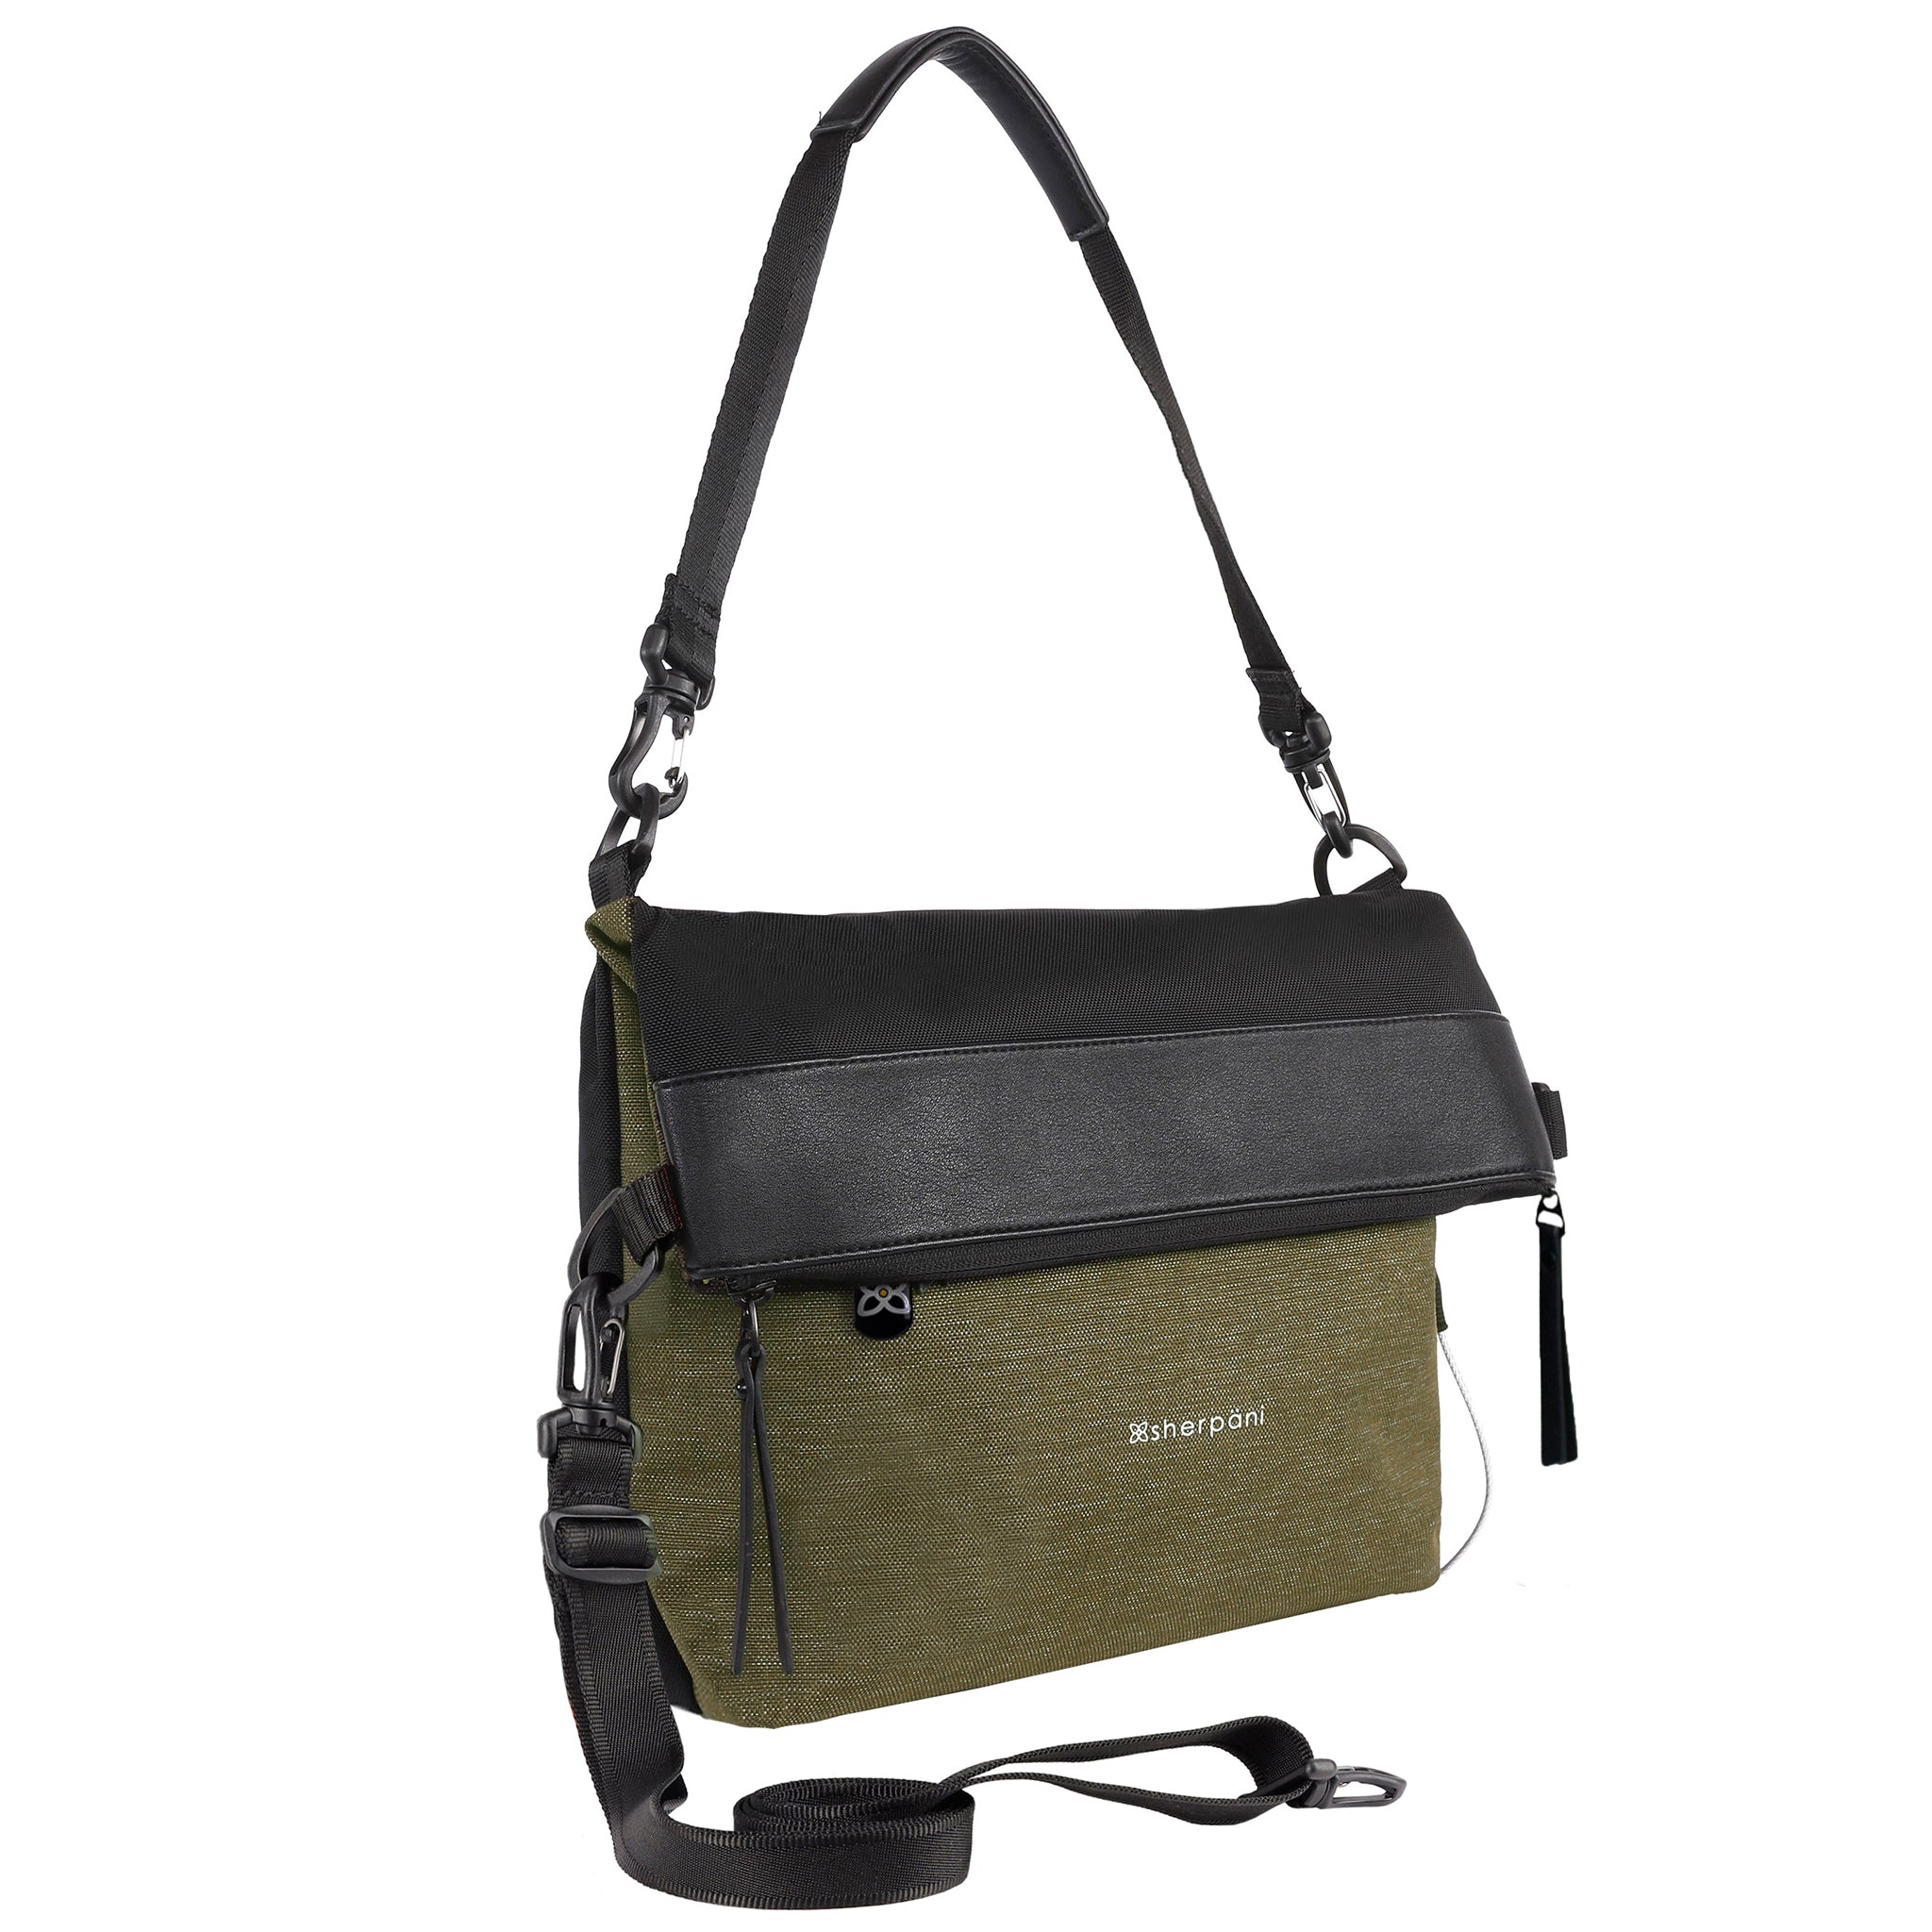 Angled front view of Sherpani's Anti-Theft bag, the Vale AT in Loden, with vegan leather accents in black. The top is folded over creating a signature overlap look. A chair loop lock is connected to a key fob clip on one side. It has an adjustable/detachable crossbody strap, and a second detachable strap fixed at a shorter length.